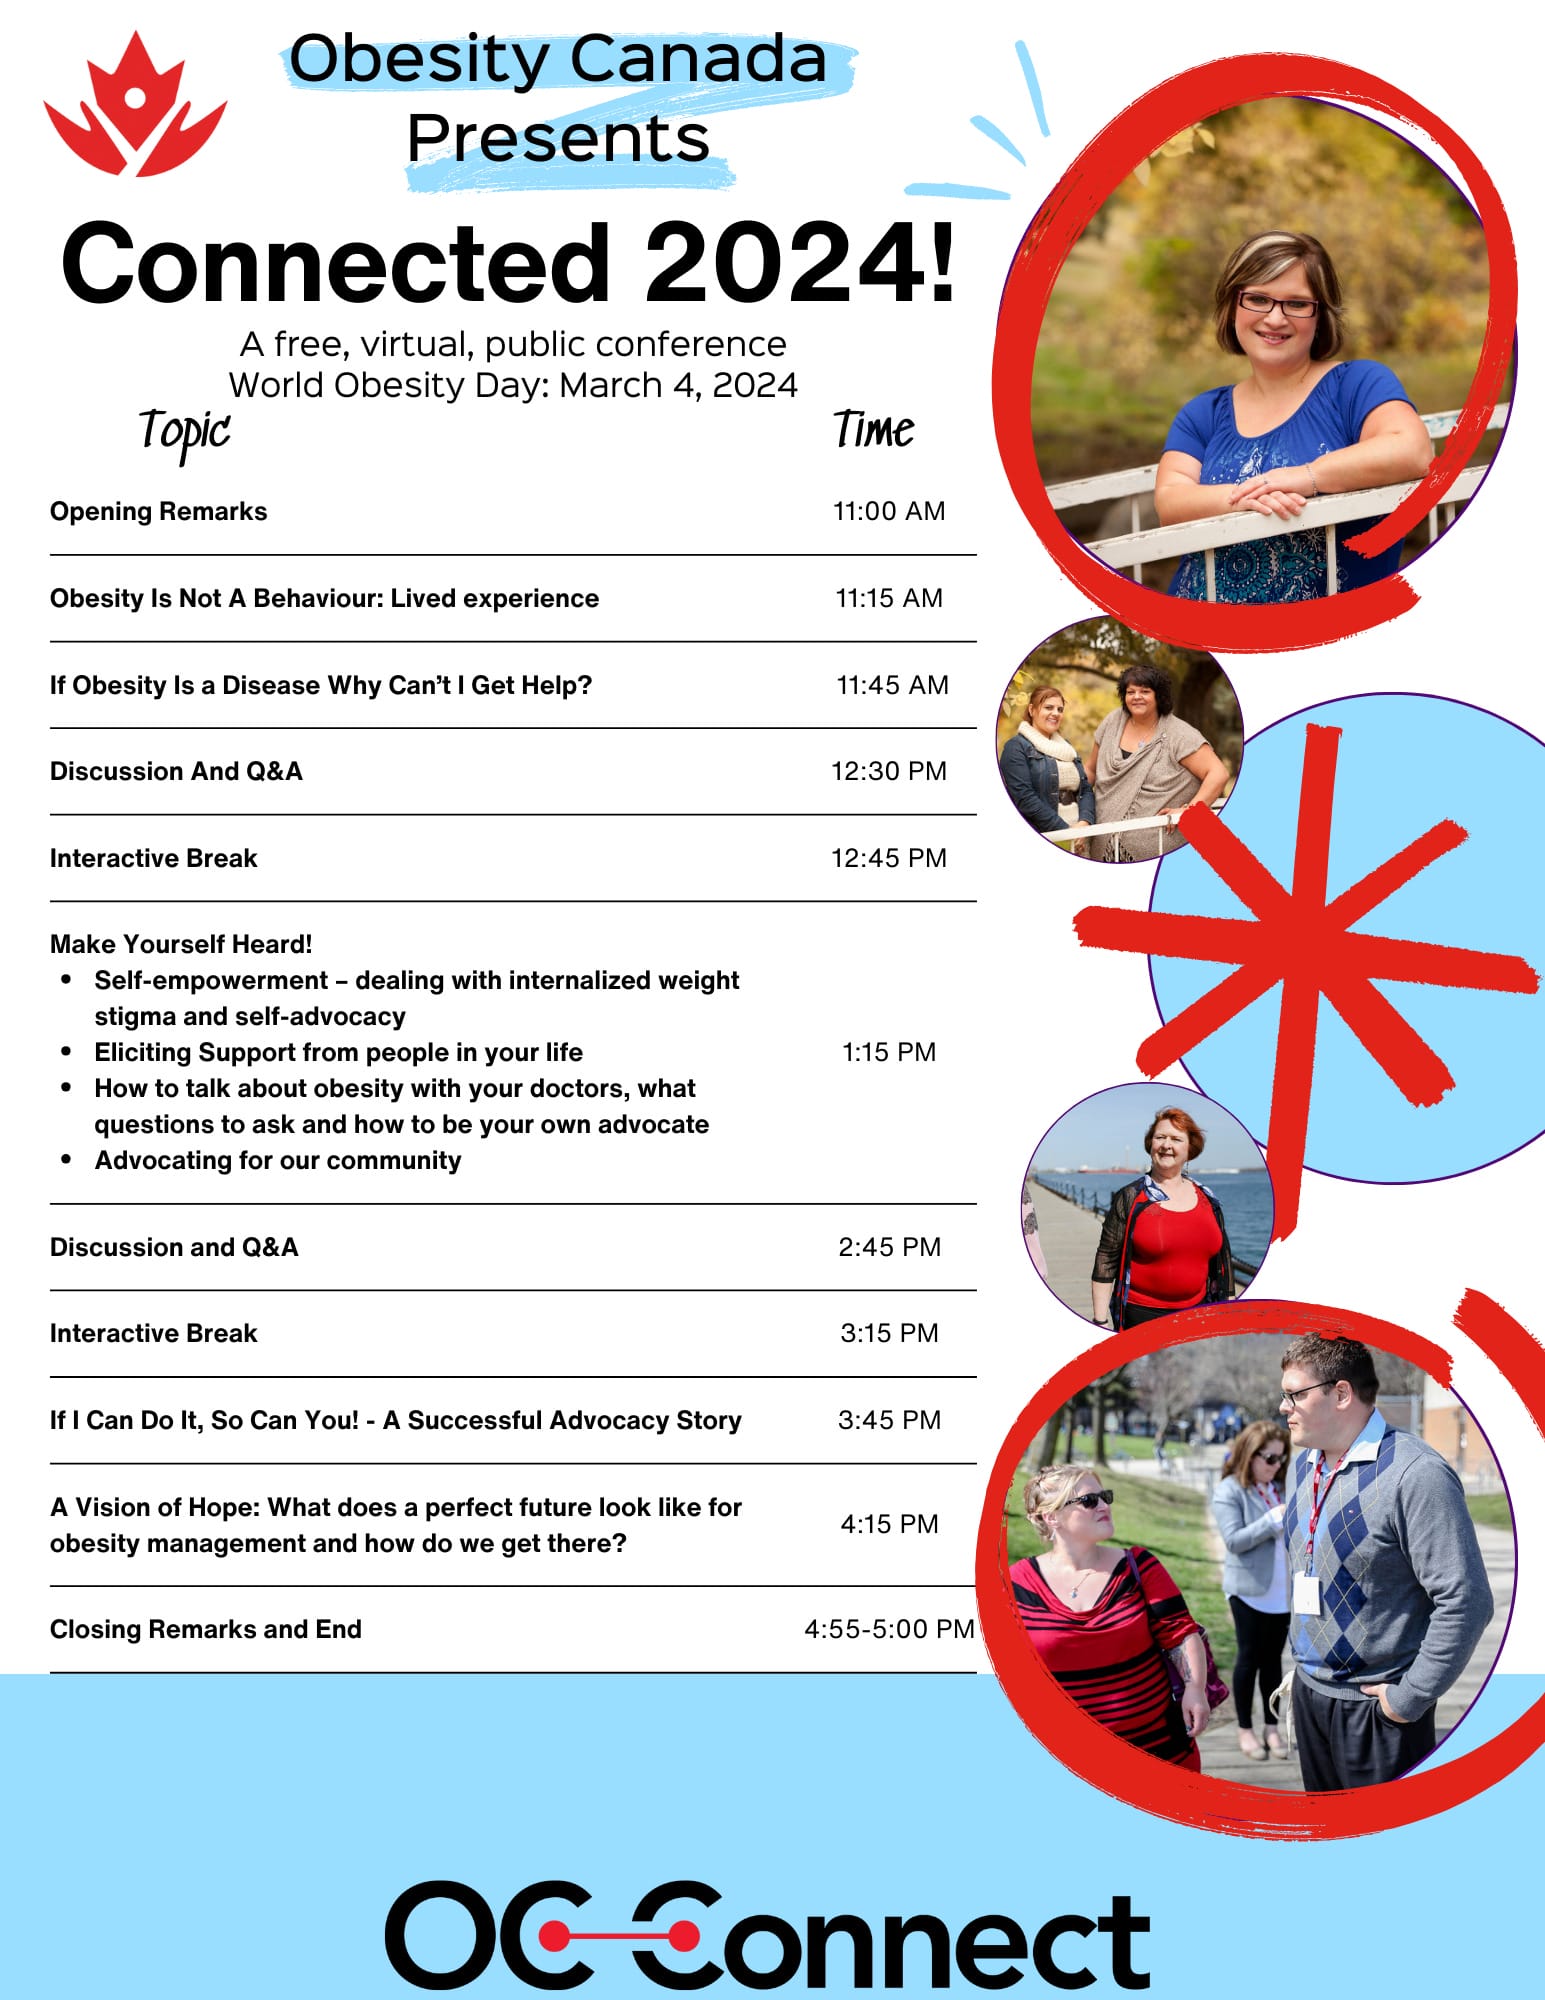 A conference poster for "obesity canada 2024" listing event schedule and topics, with a circled photo of a featured speaker at the top right.